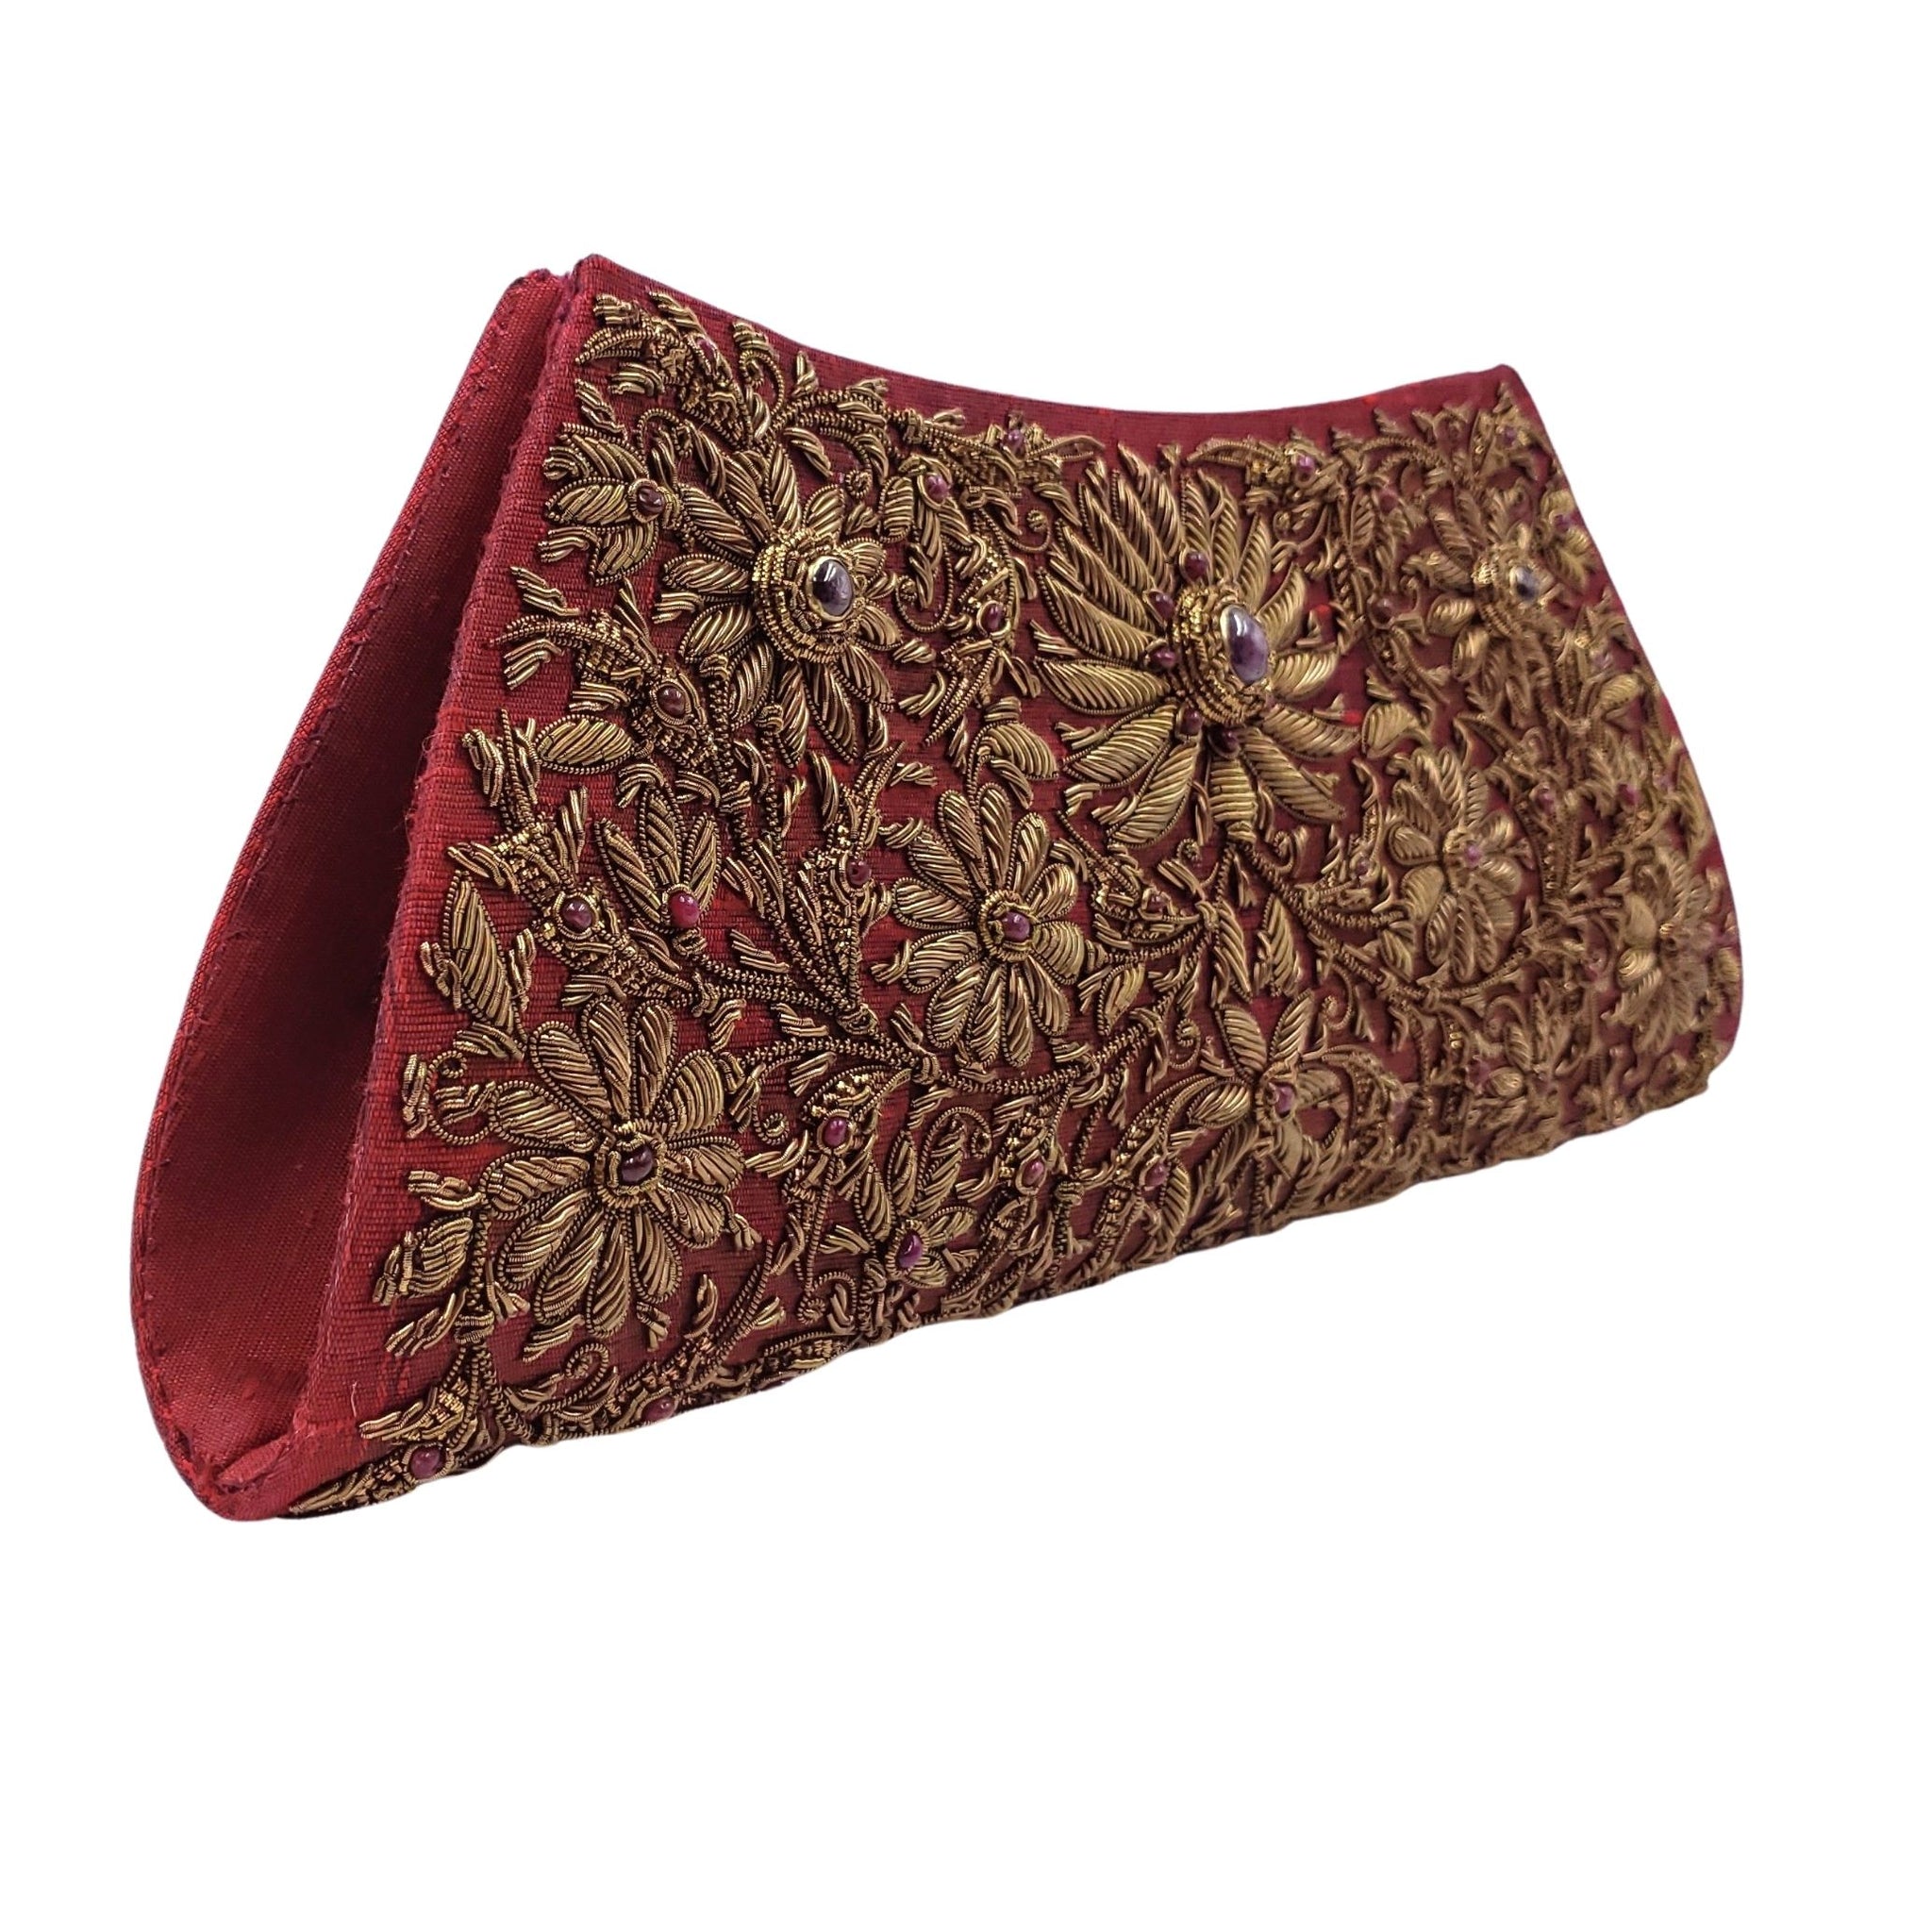 Creative Red Zardozi Clutch Purse from Indian Hand Embroidery Artisans | Maroon  Clutch Bag | Christmas Bag for Gift - Zardouzee